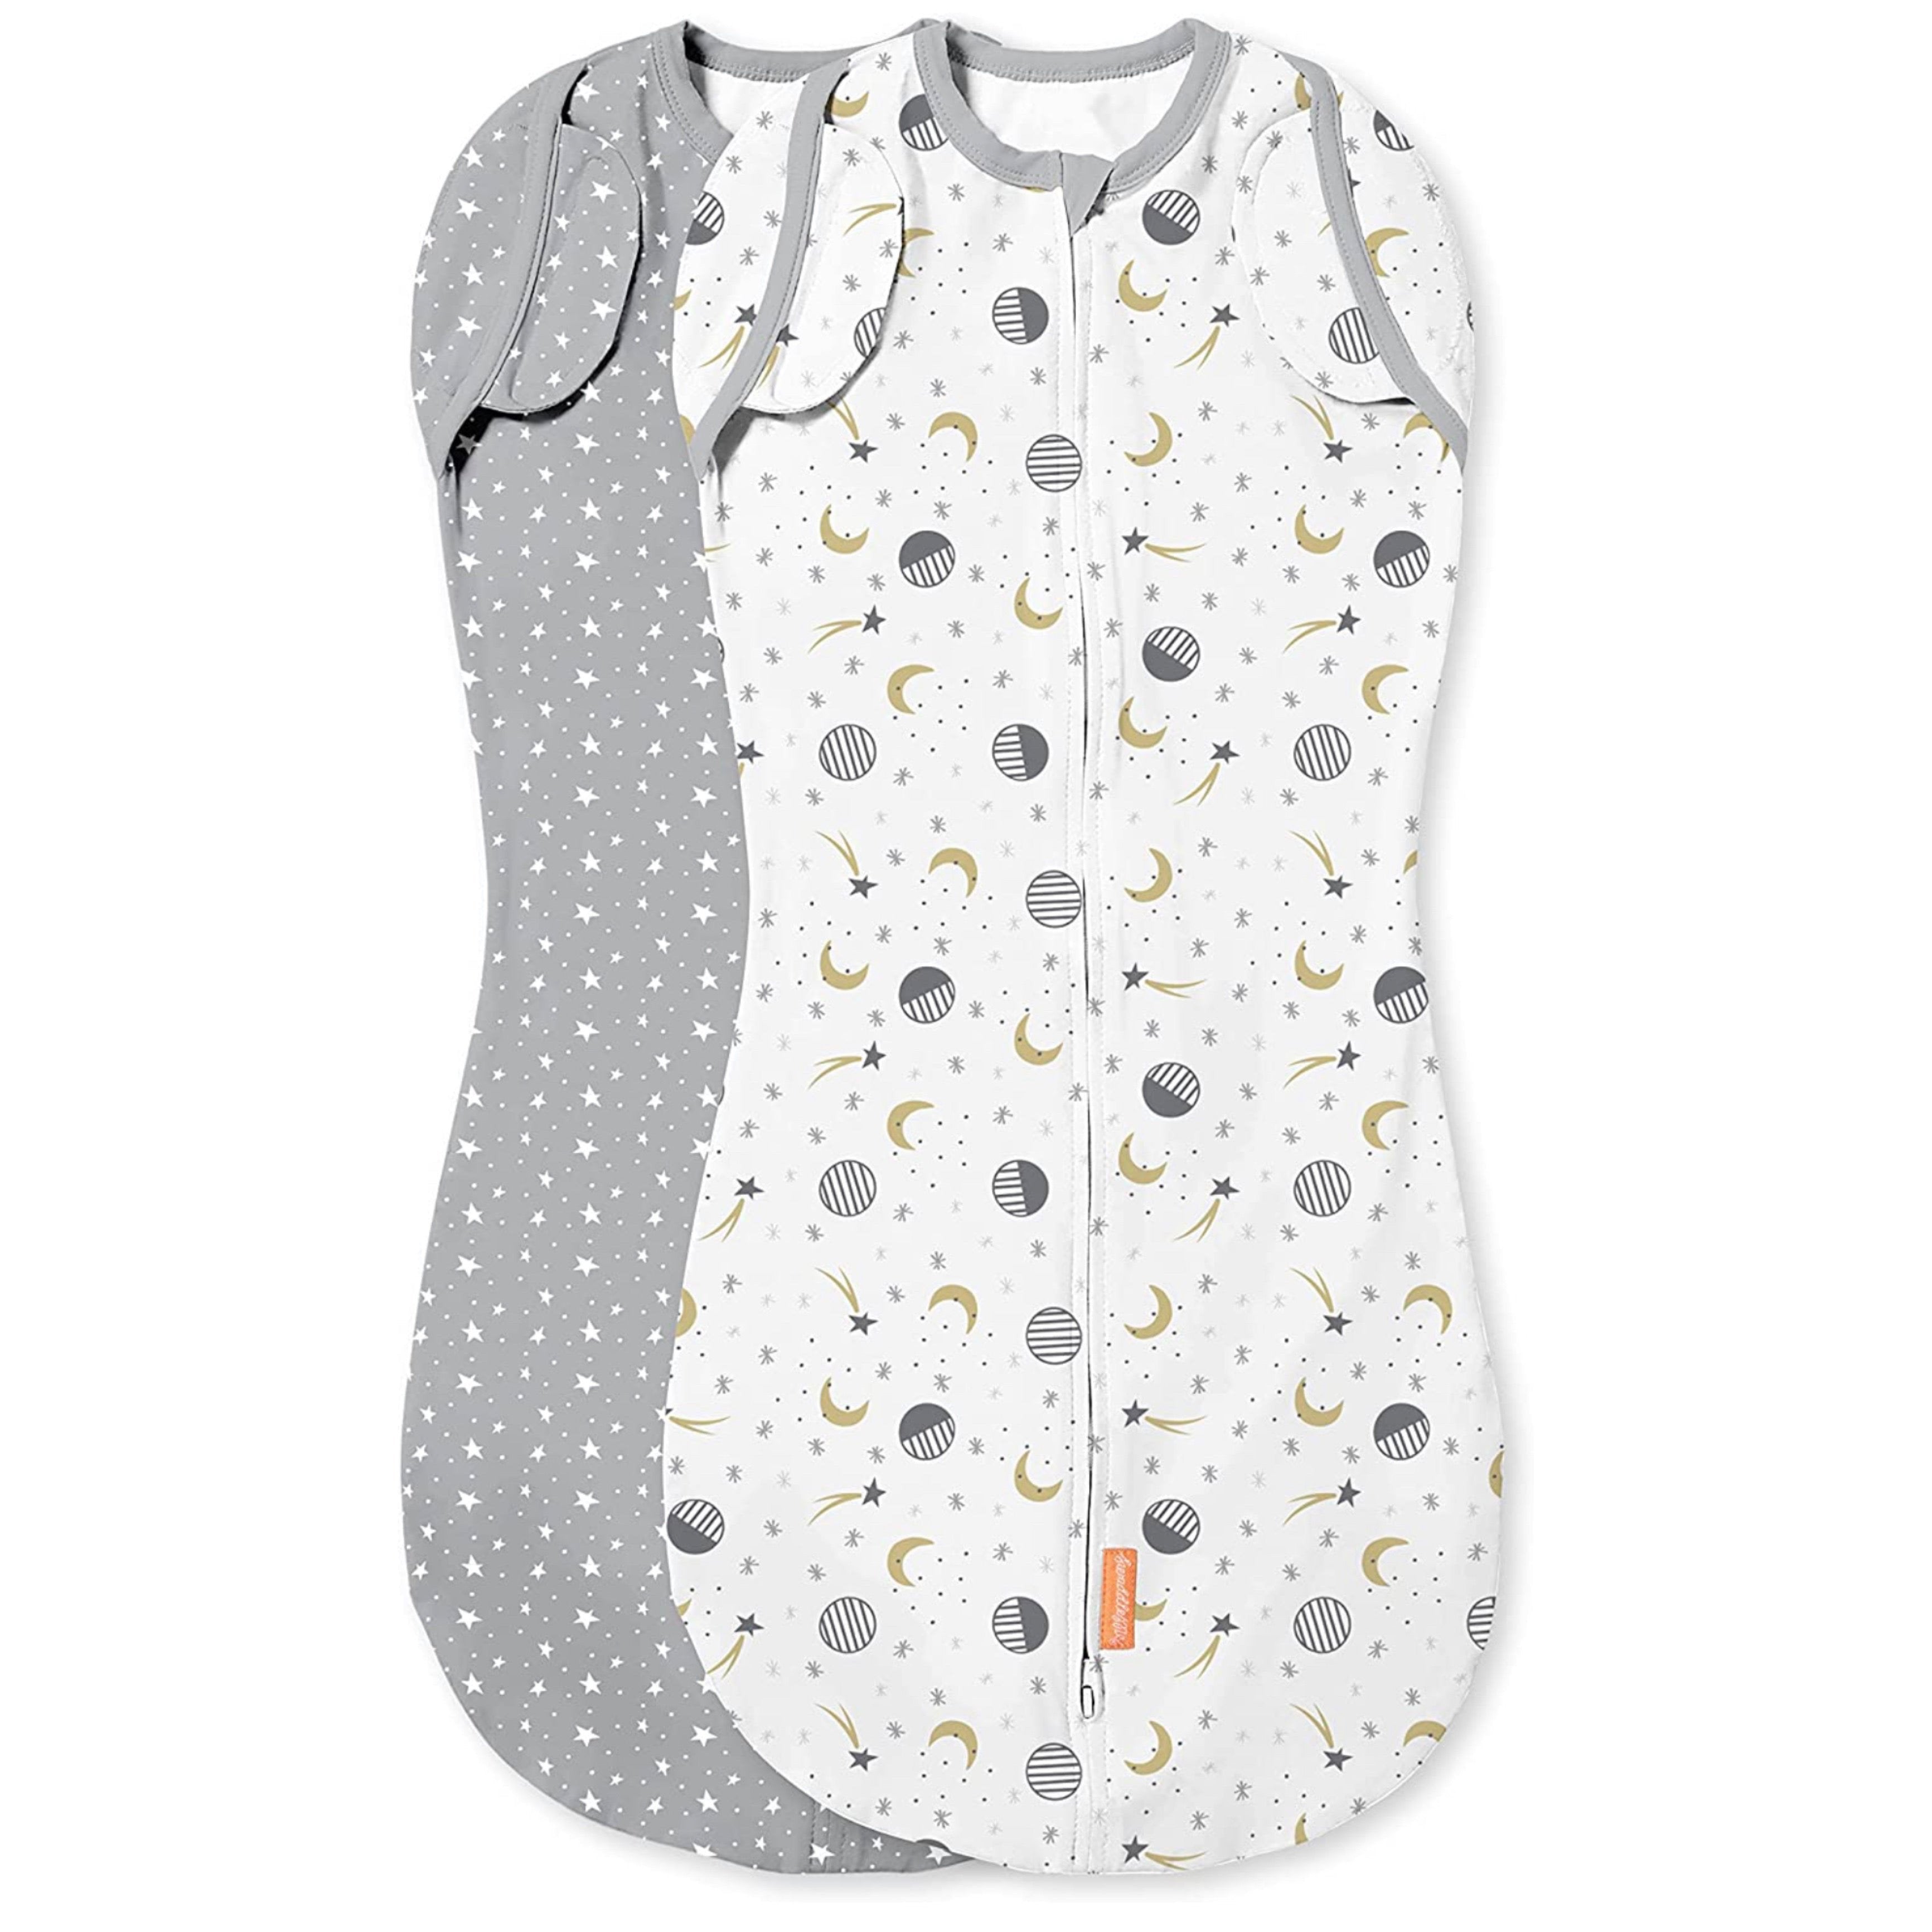 SwaddleMe Arms Free Convertible Pod – Size Large, 4-6 Months, 2-Pack.